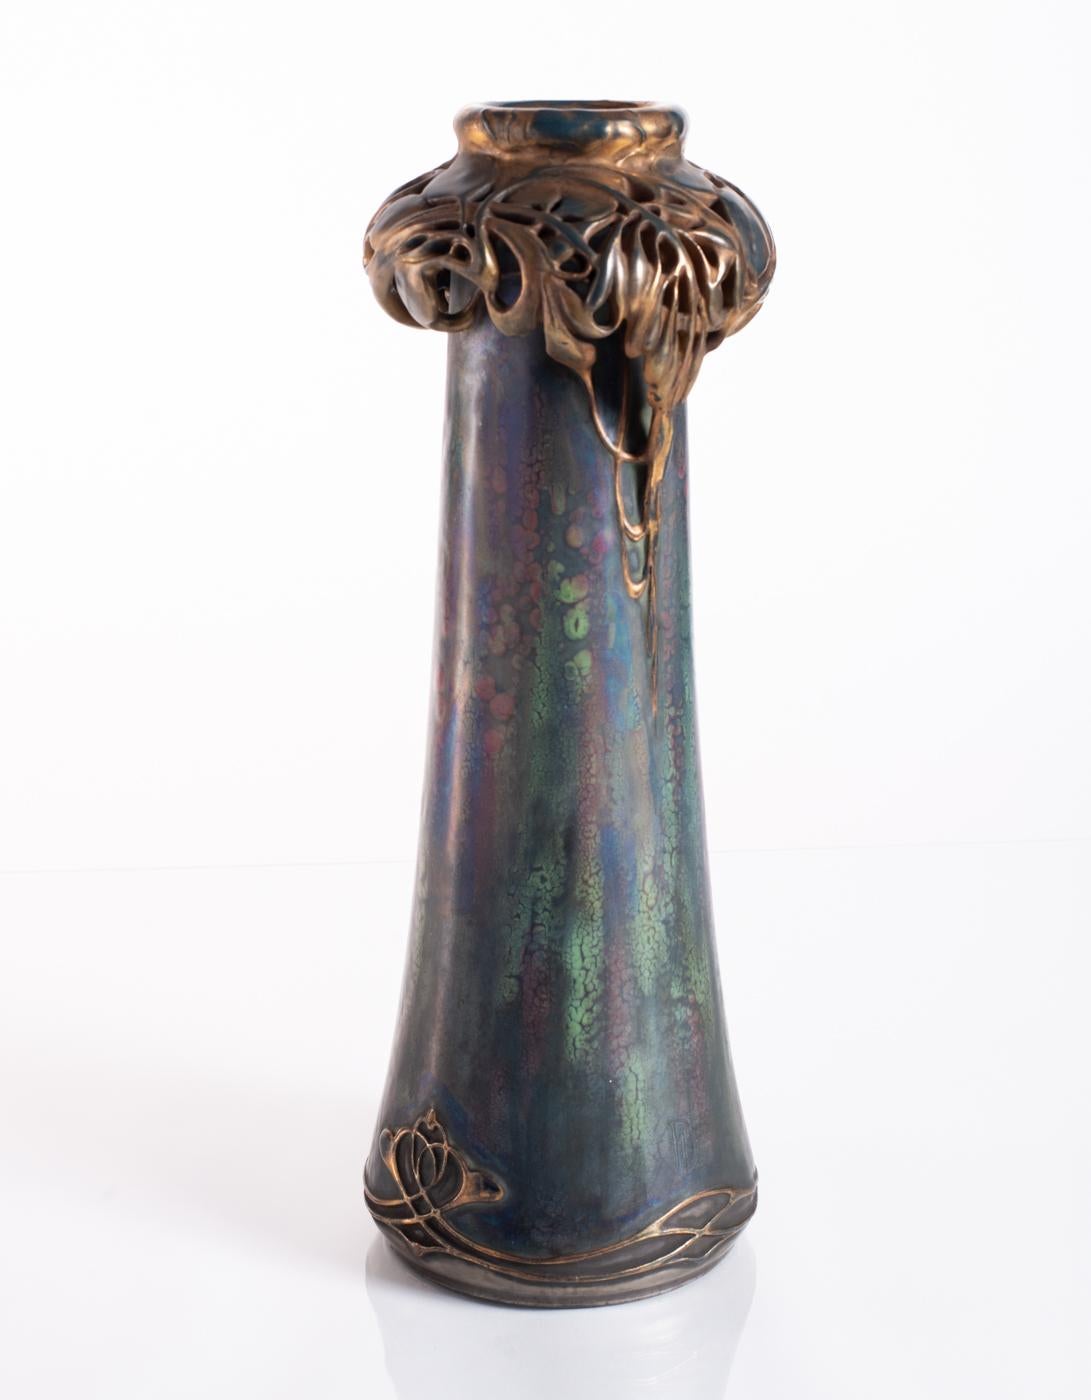 Floral Wreath Vase by Paul Dachsel for Amphora c. 1900 - Art by RStK Amphora